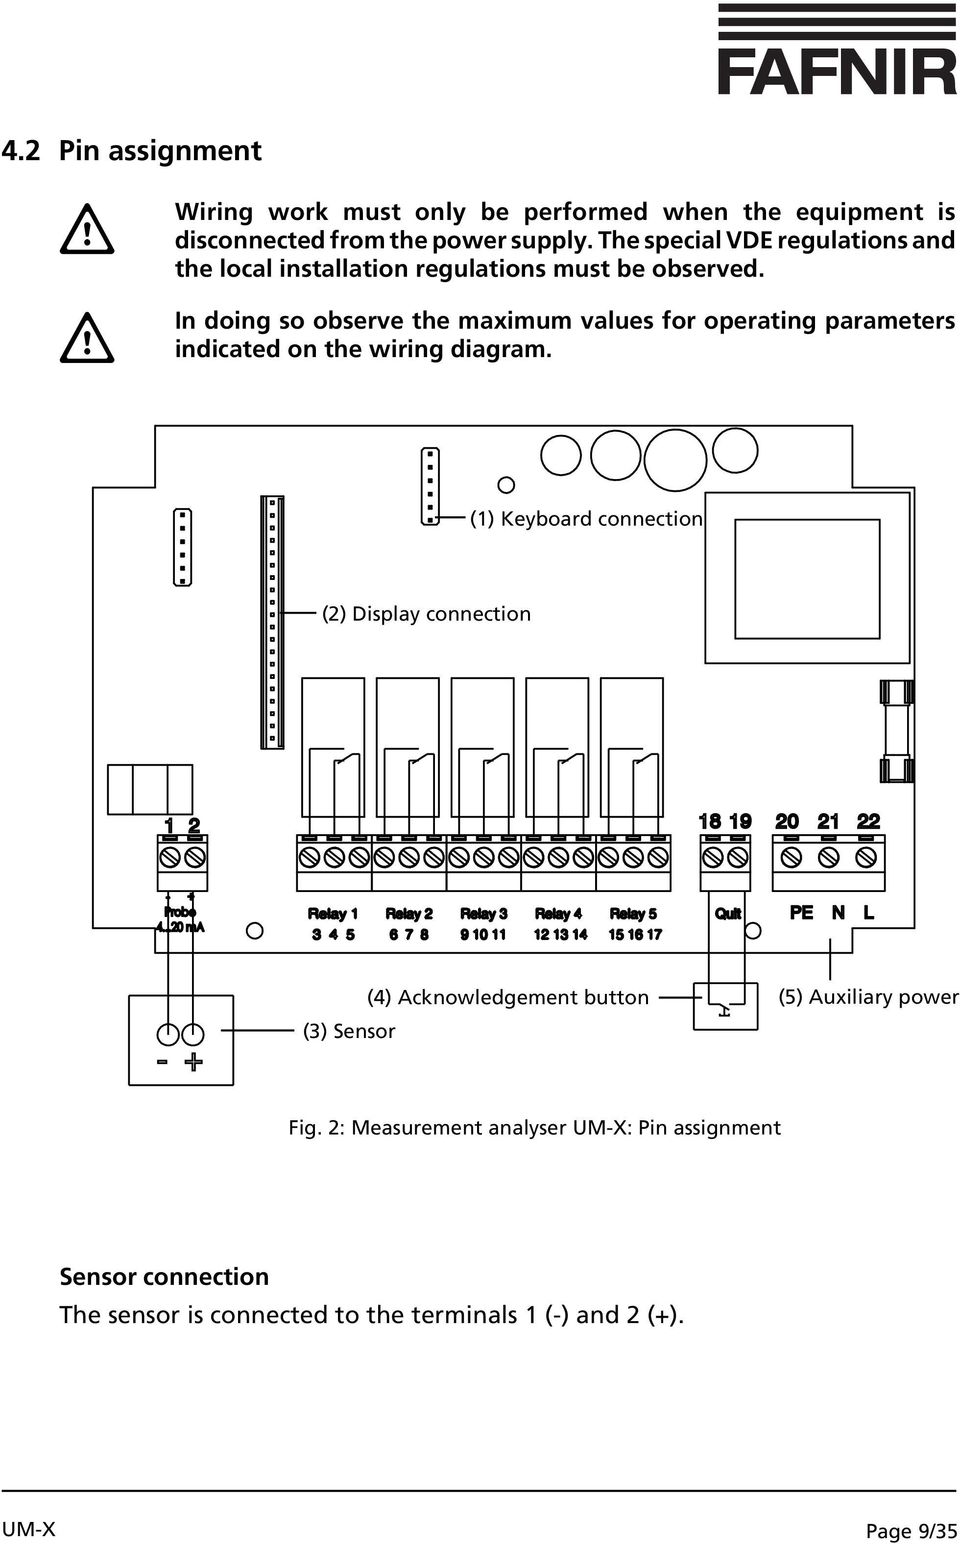 In doing so observe the maximum values for operating parameters indicated on the wiring diagram.